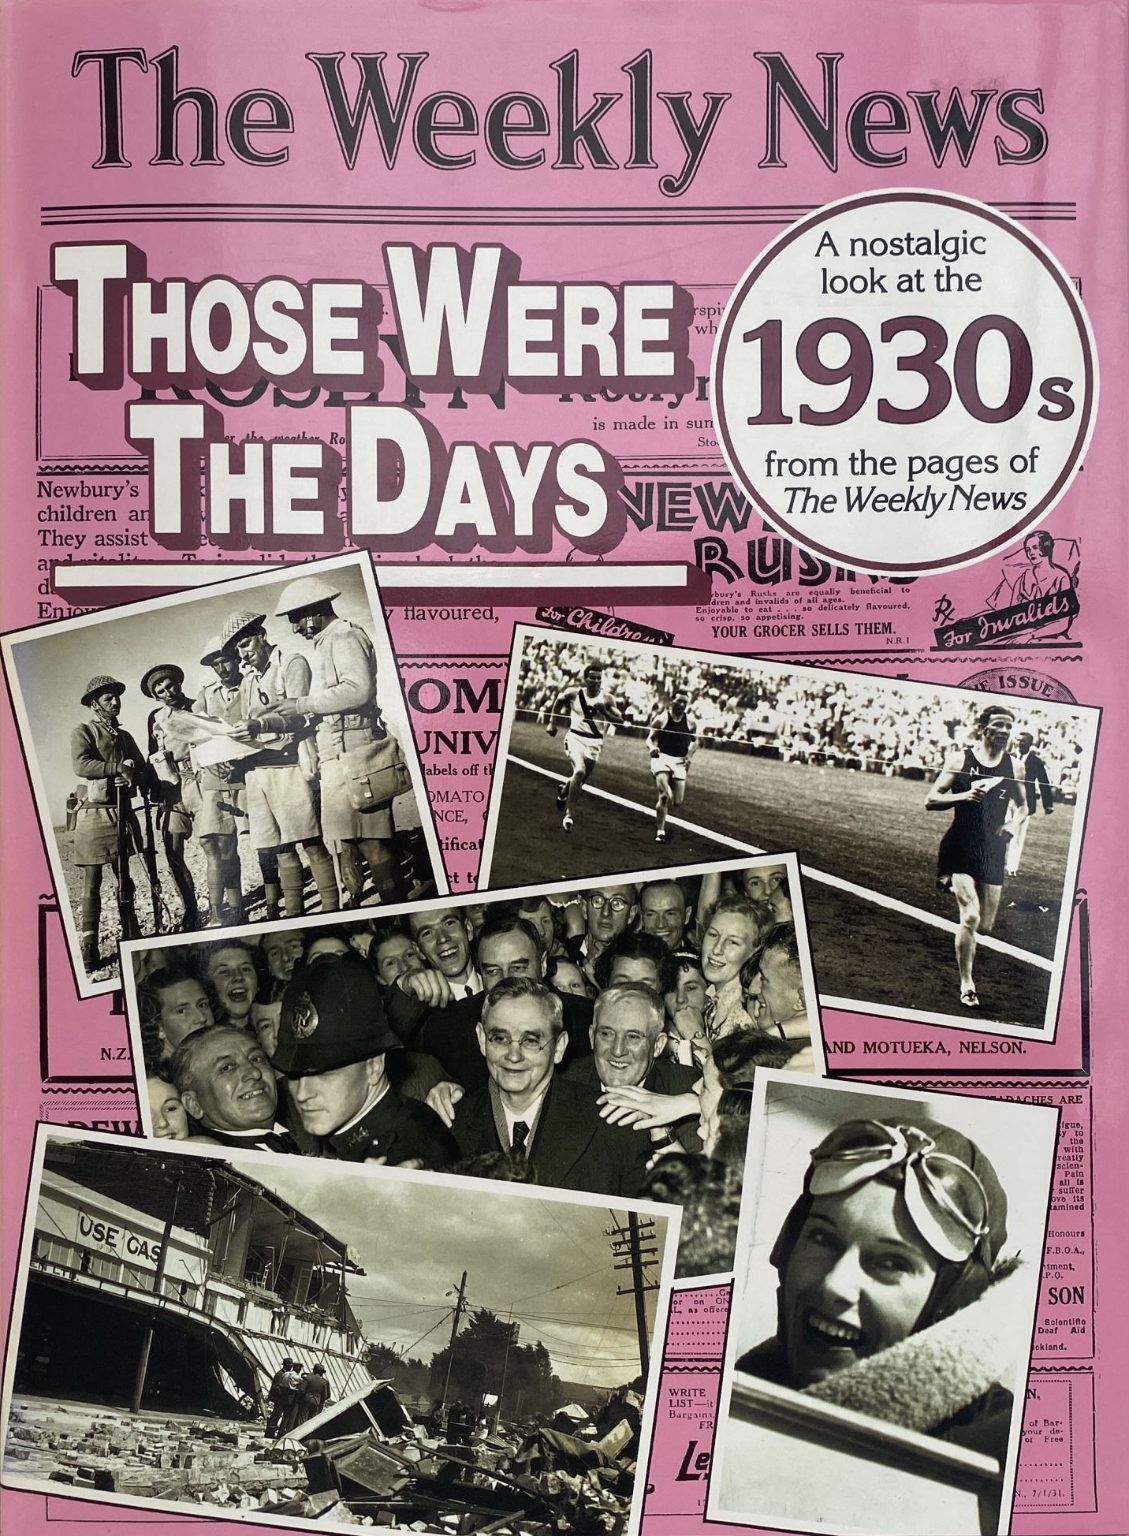 THOSE WERE THE DAYS: A nostalgic look at The Weekly News 1930s